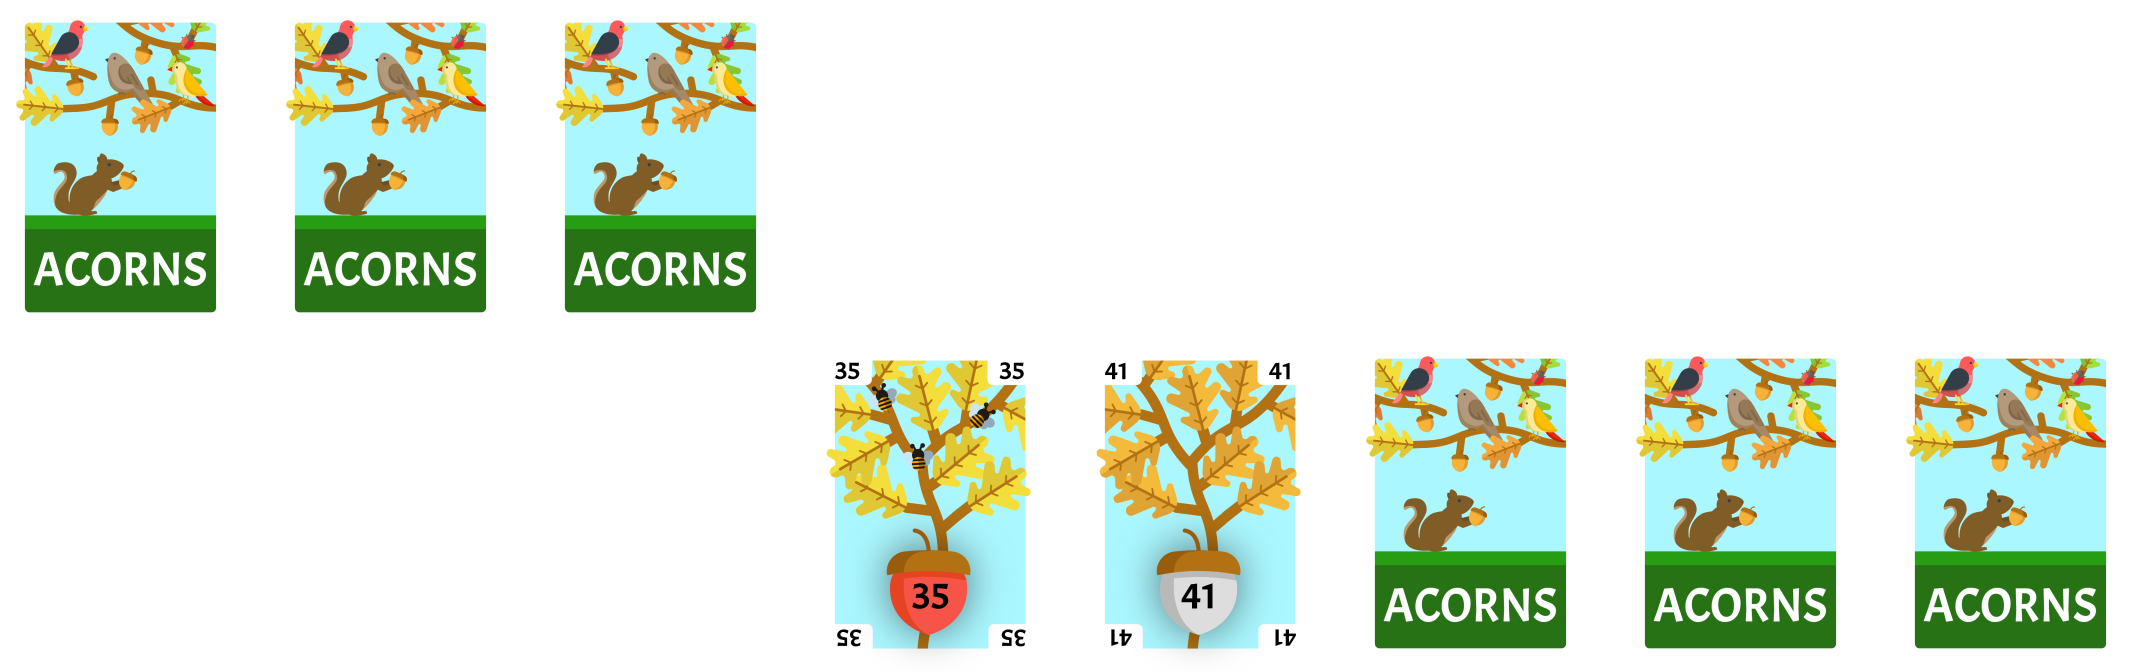 35 swapping positions with the card to the right of the shifted-up cards.